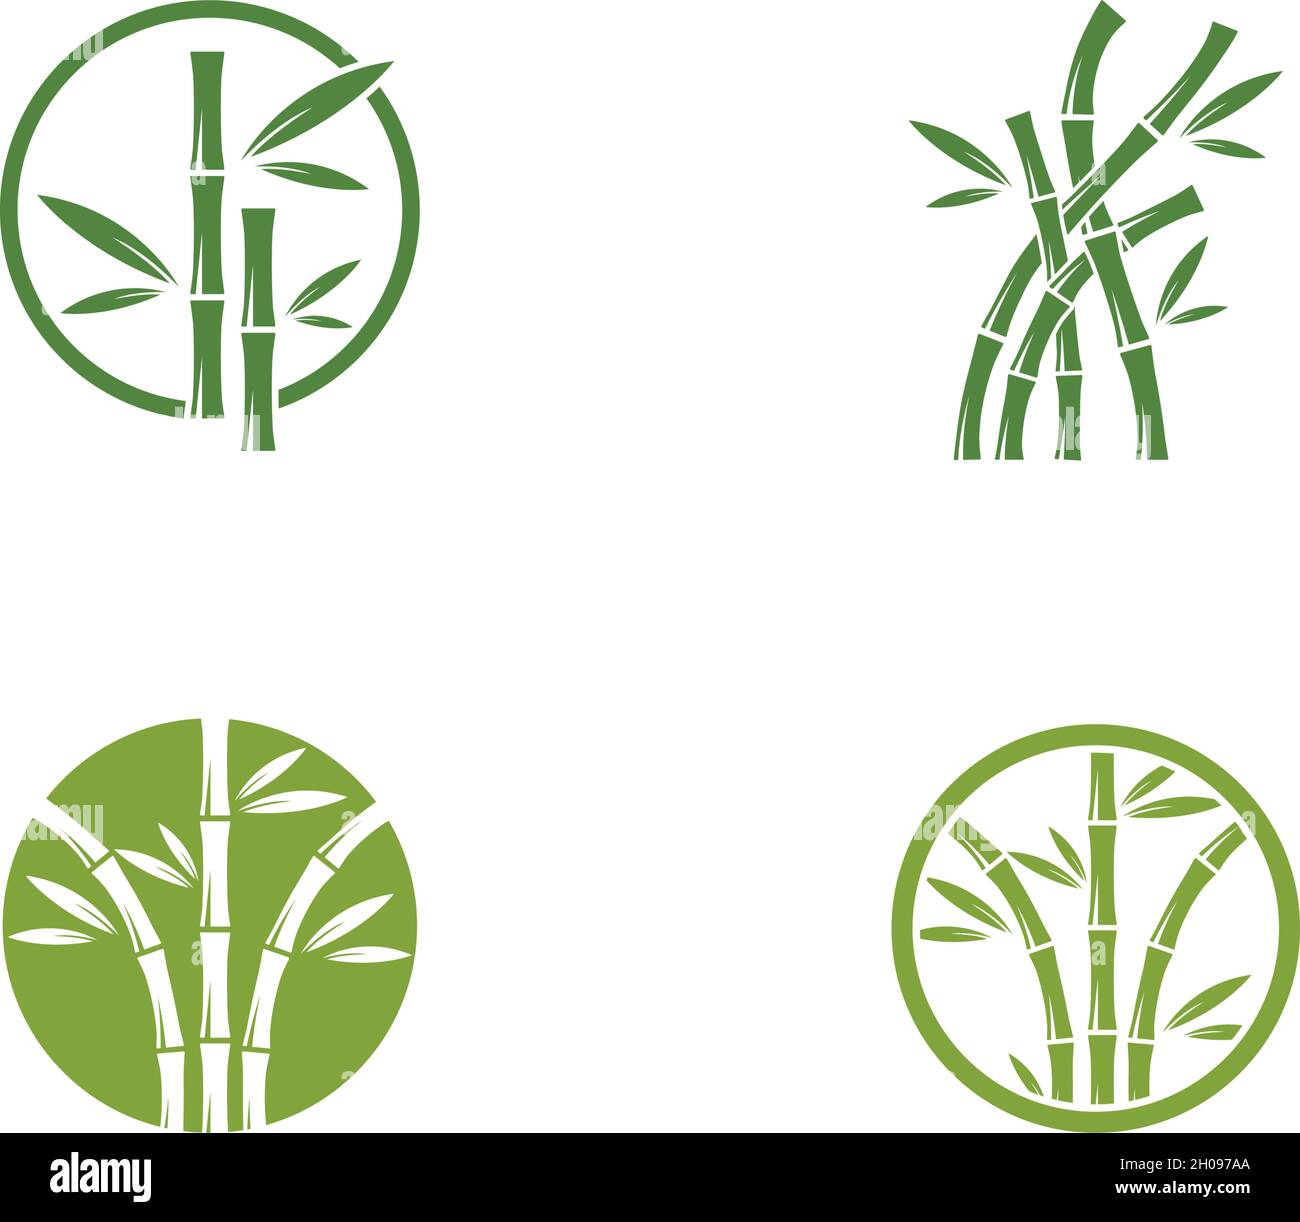 Bamboo with green leaf logo vector icon template Stock Vector